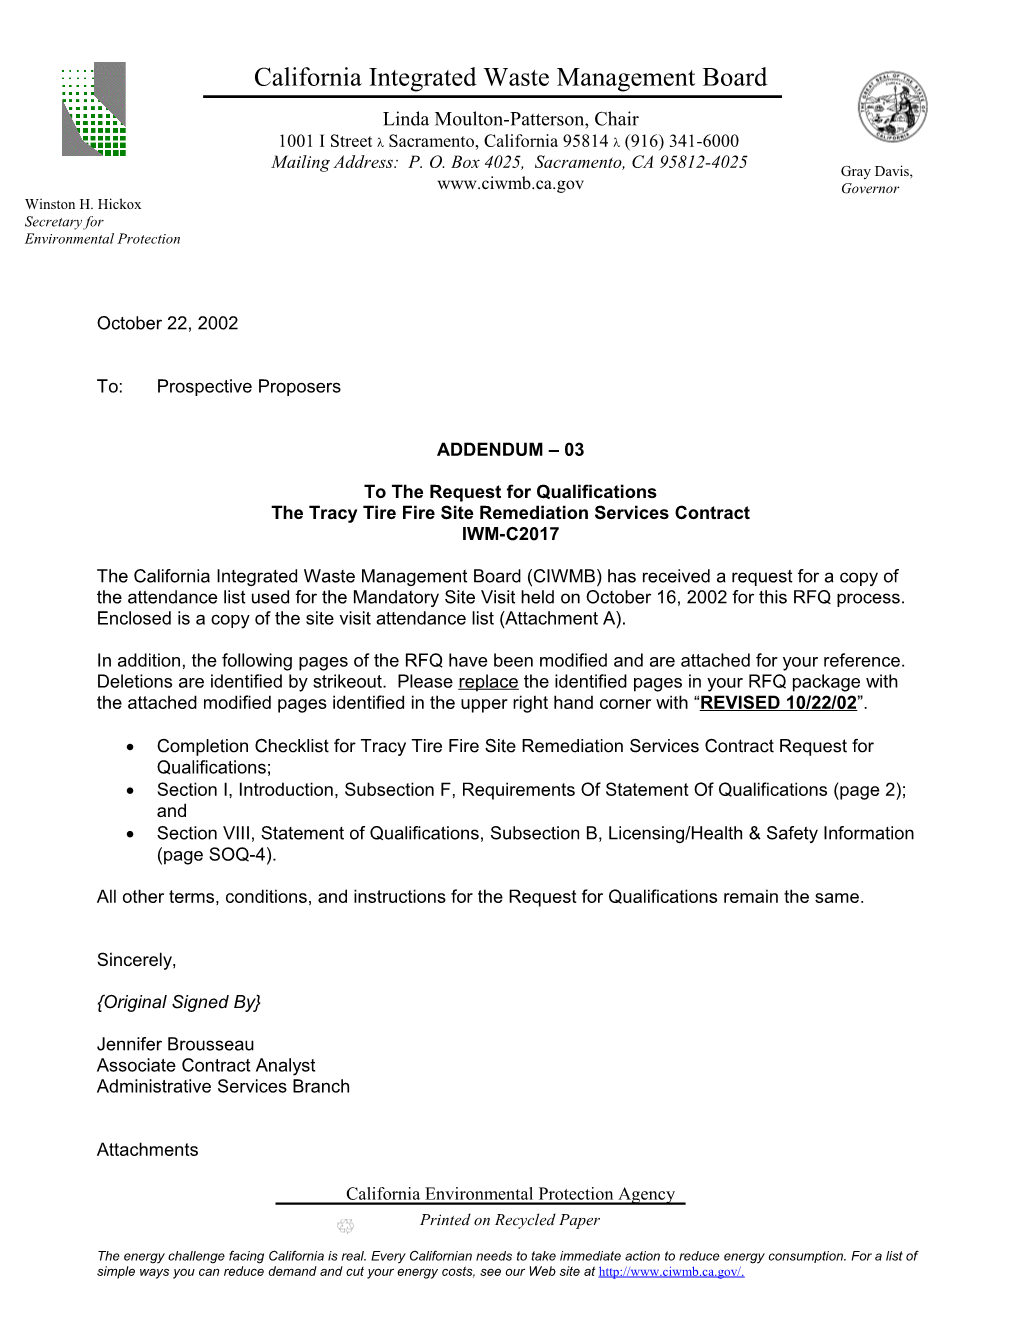 The Tracy Tire Fire Site Remediation Services Contract